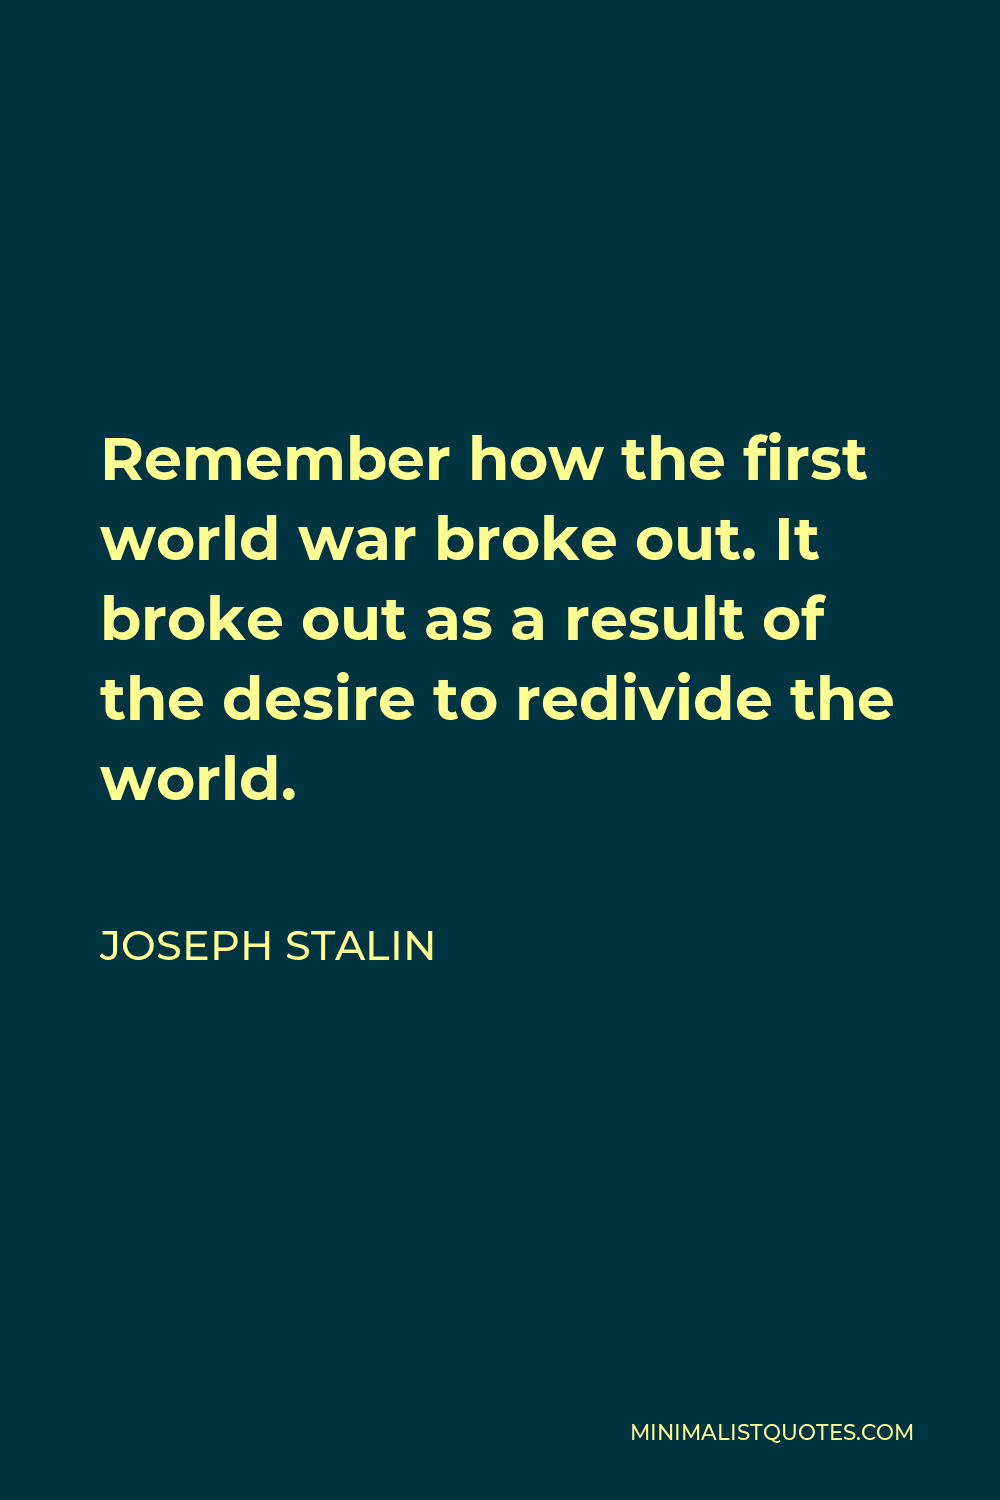 Joseph Stalin Quote - Remember how the first world war broke out. It broke out as a result of the desire to redivide the world.